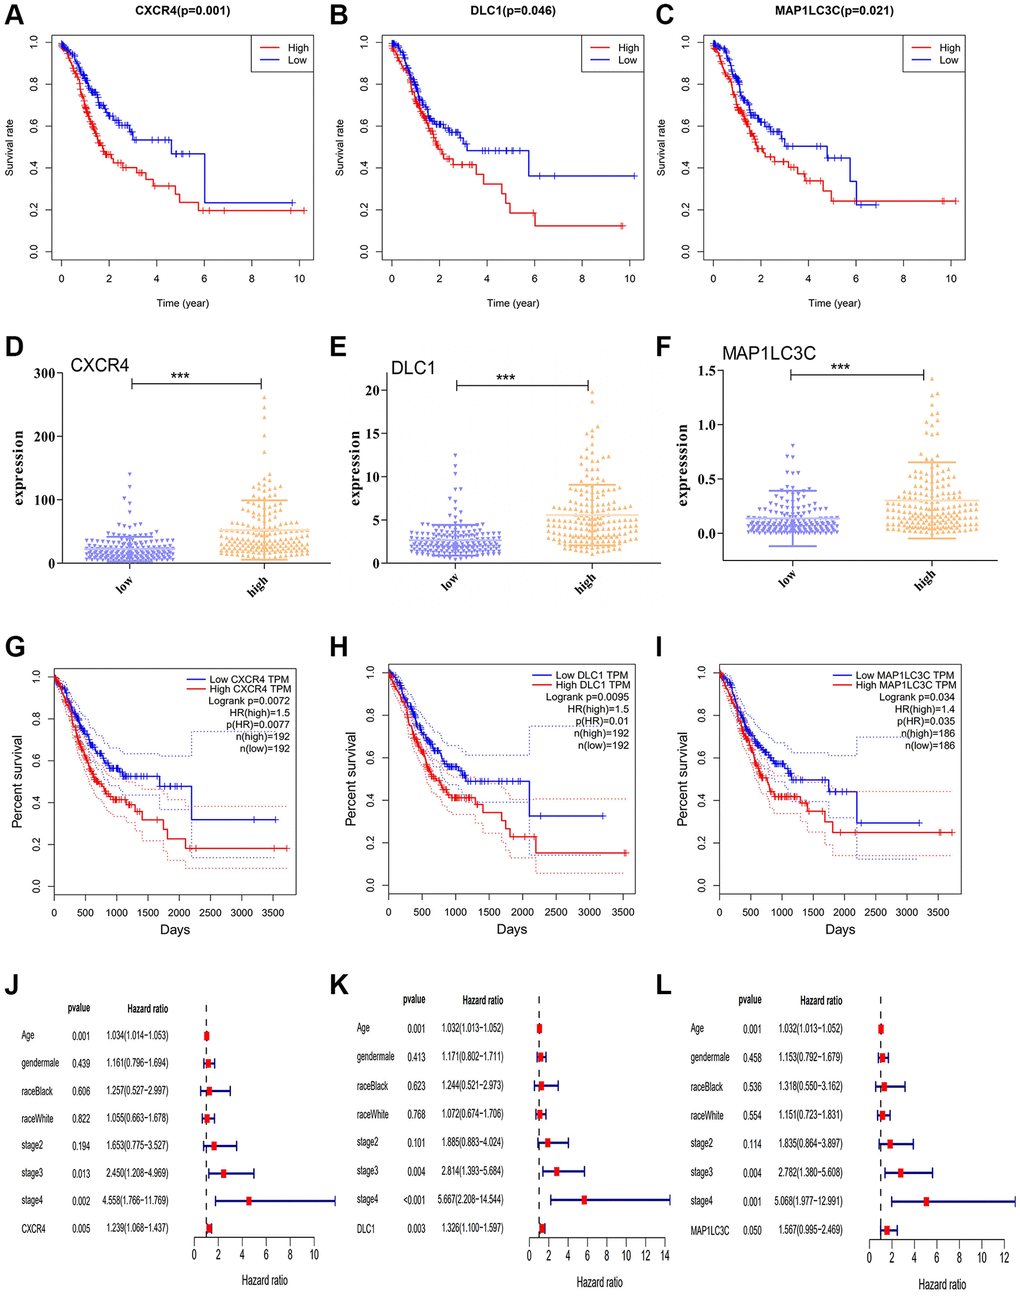 Prognostic significance of DE-ATGs in GC. (A–C) Kaplan-Meier curves for three prognostic DE-ATGs (CXCR4, DLC1, and MAP1LC3C) related to immunity in patients with GC (P D–F) The expression level of CXCR4, DLC1, and MAP1LC3C in high- and low-macrophage infiltration groups. (G–I) GEPIA-based validation that DE-ATGs (CXCR4, DLC1, and MAP1LC3C) are effective prognostic indicators and risk factors for GC. (J–L) Tree diagram of a multivariate regression analysis for CXCR4, DLC1, and MAP1LC3C with other clinical variables.